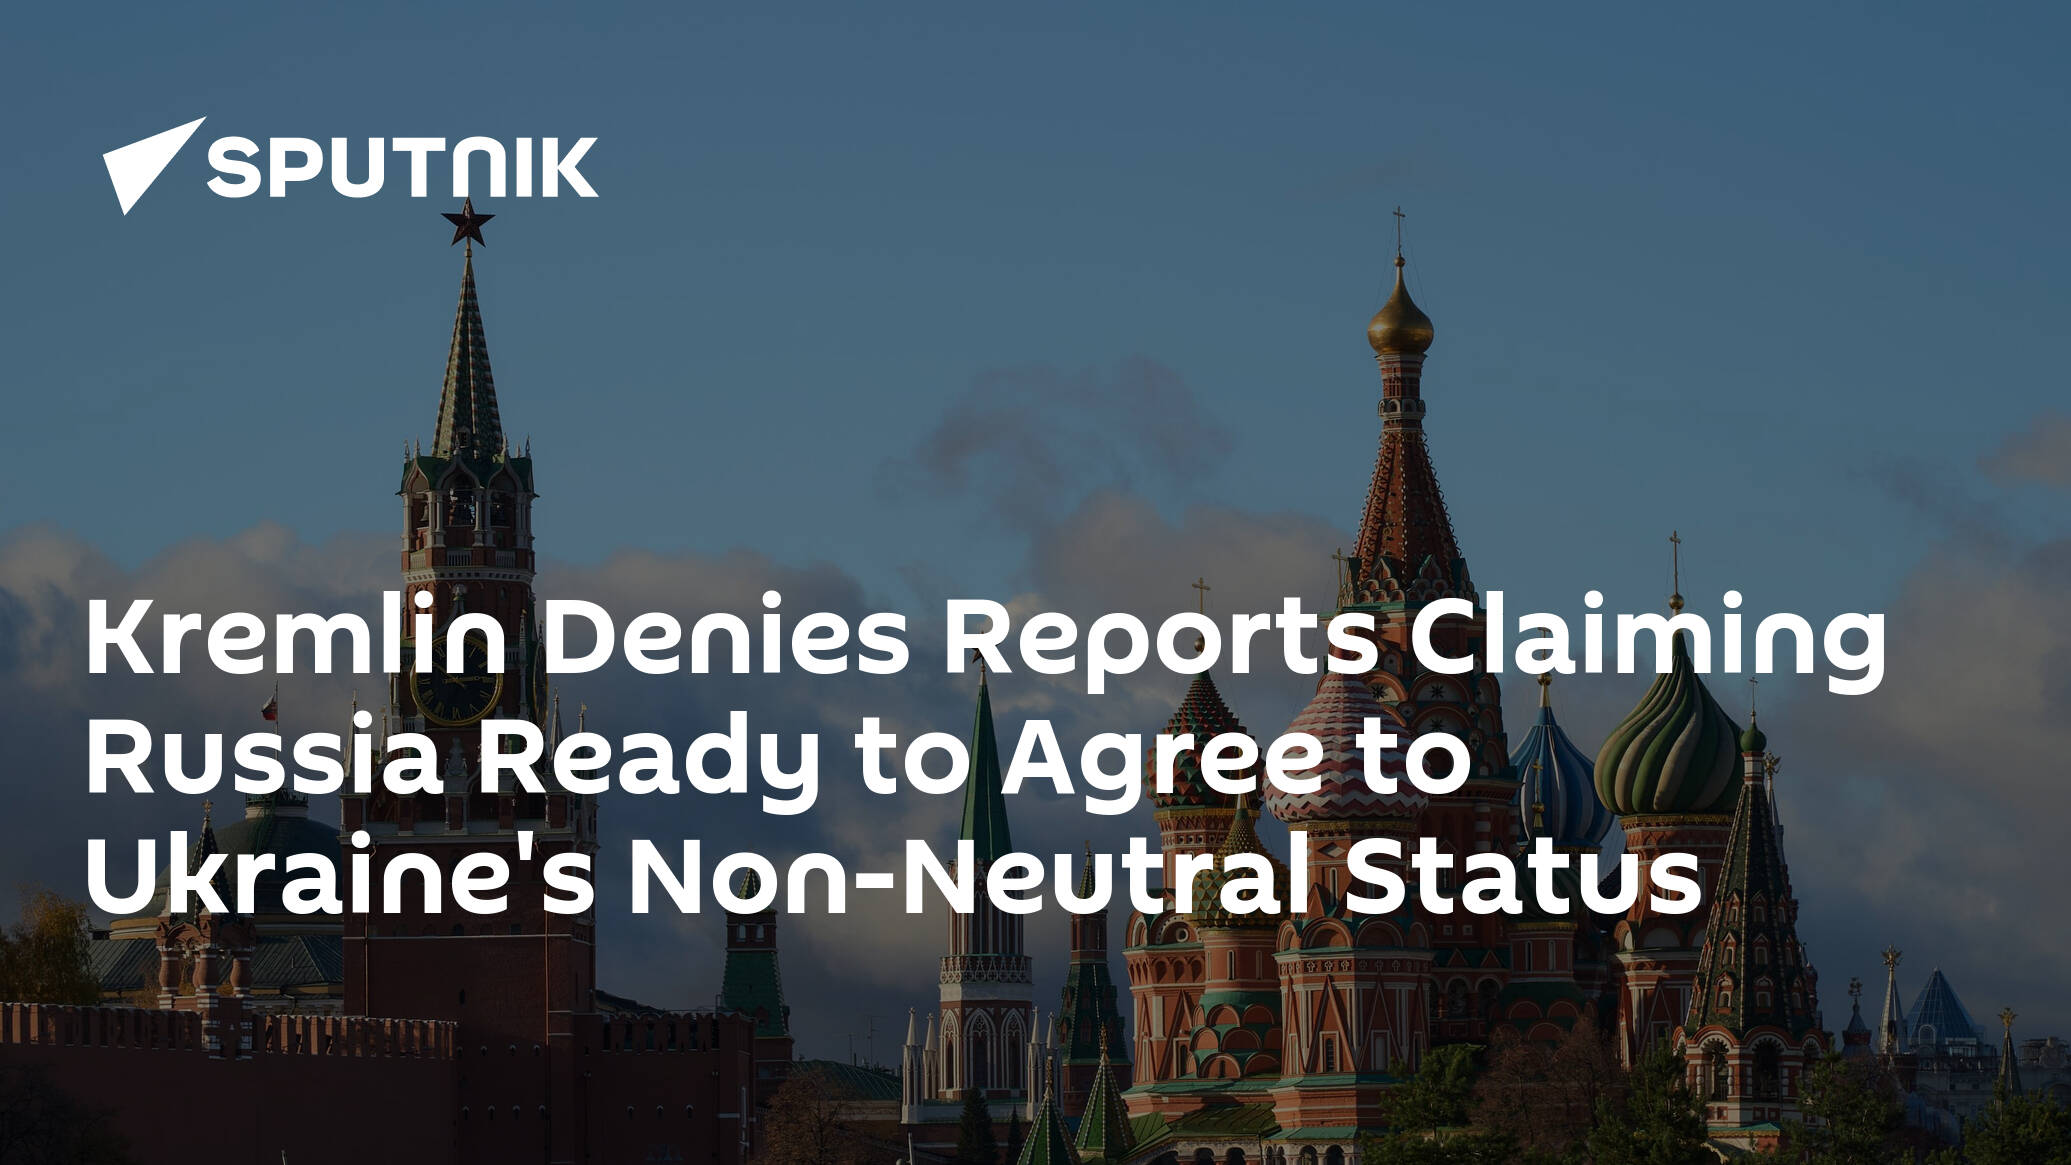 Kremlin Denies Reports Claiming Russia Ready to Agree to Ukraine's Non-Neutral Status